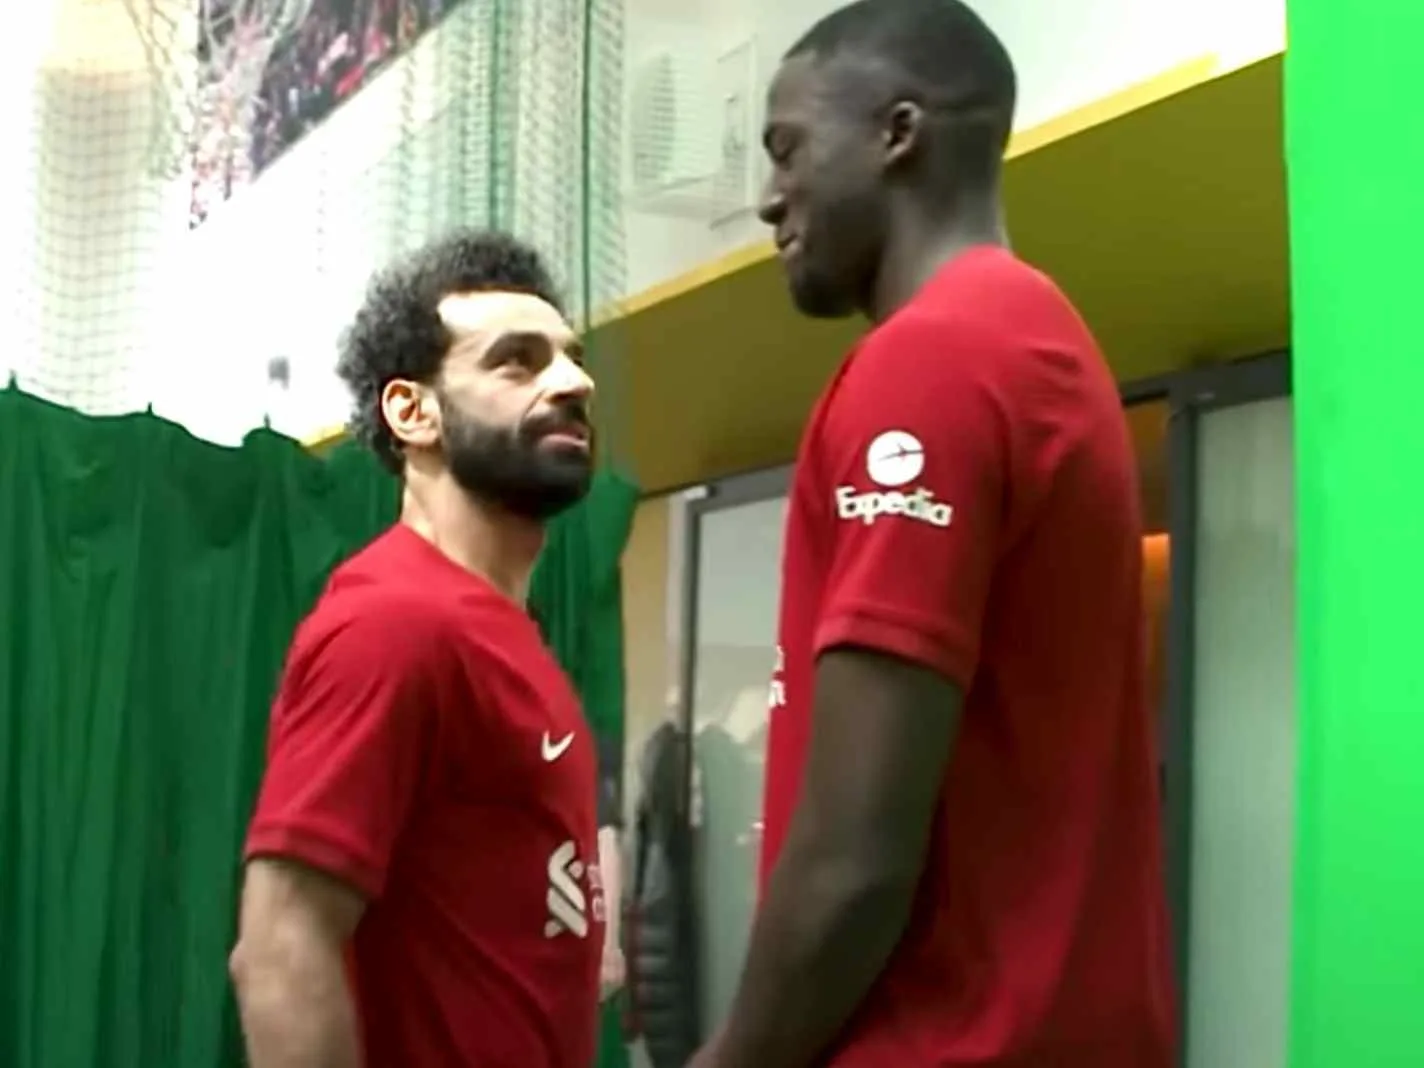 In this image - Mohamed Salah squaring up to Ibrahima Konate during a photoshoot